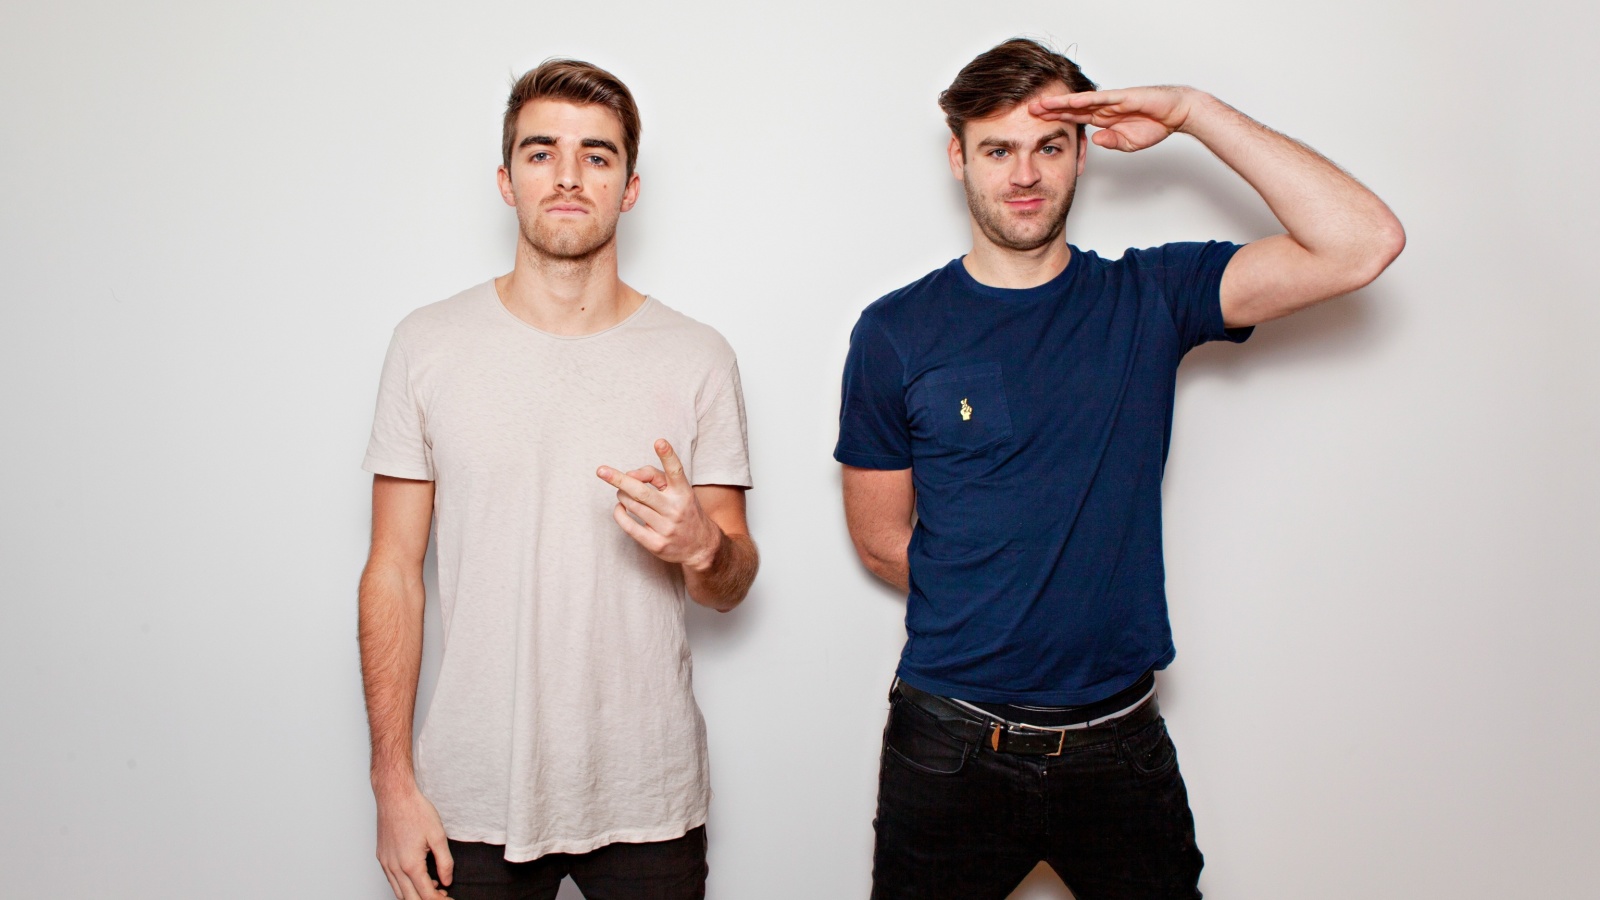 The Chainsmokers with Andrew Taggart and Alex Pall screenshot #1 1600x900